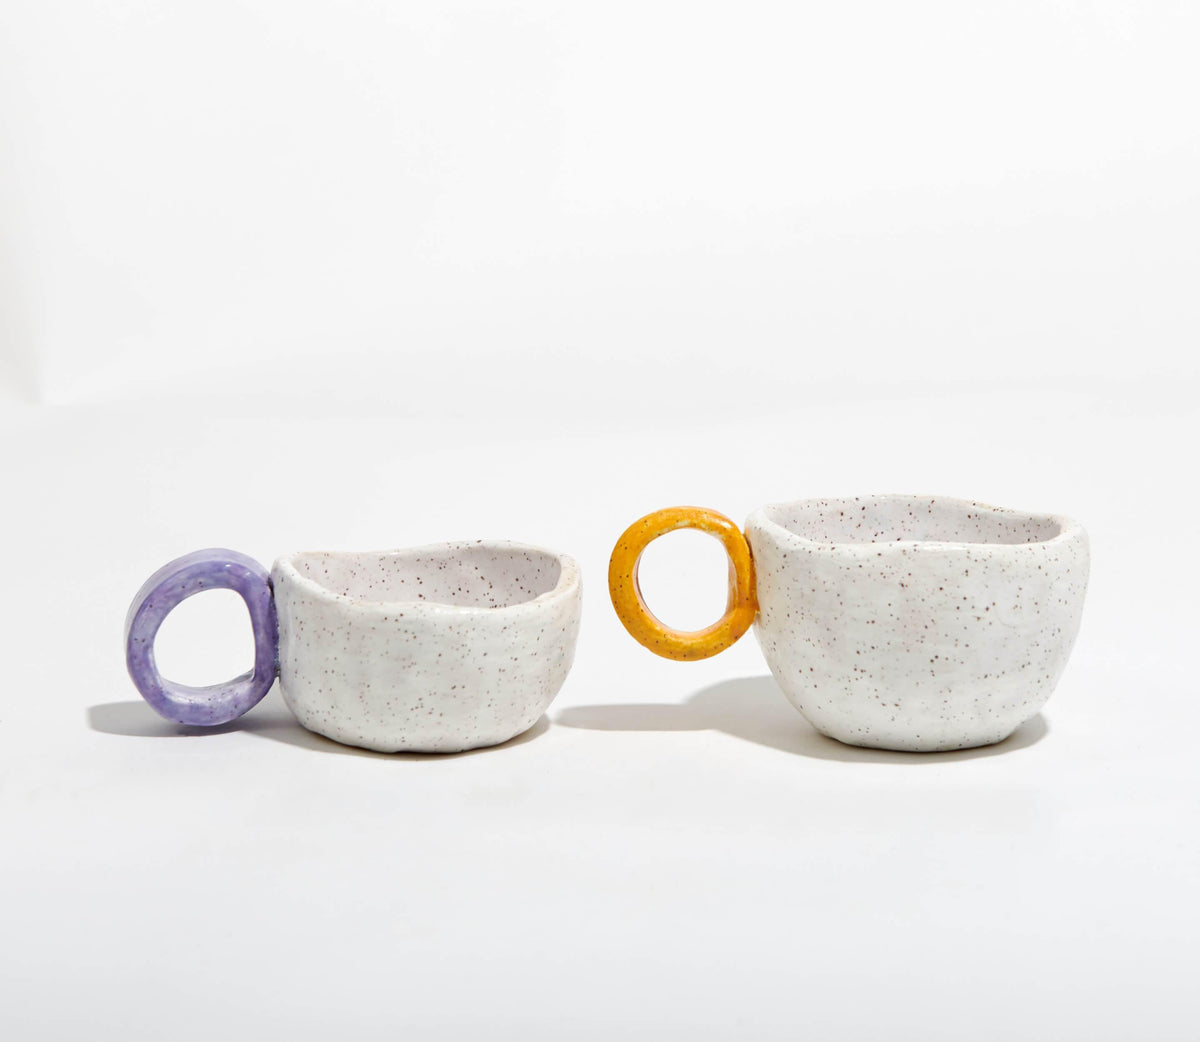 Beginner Pottery Kit – Ceramic - Pottery with a Purpose